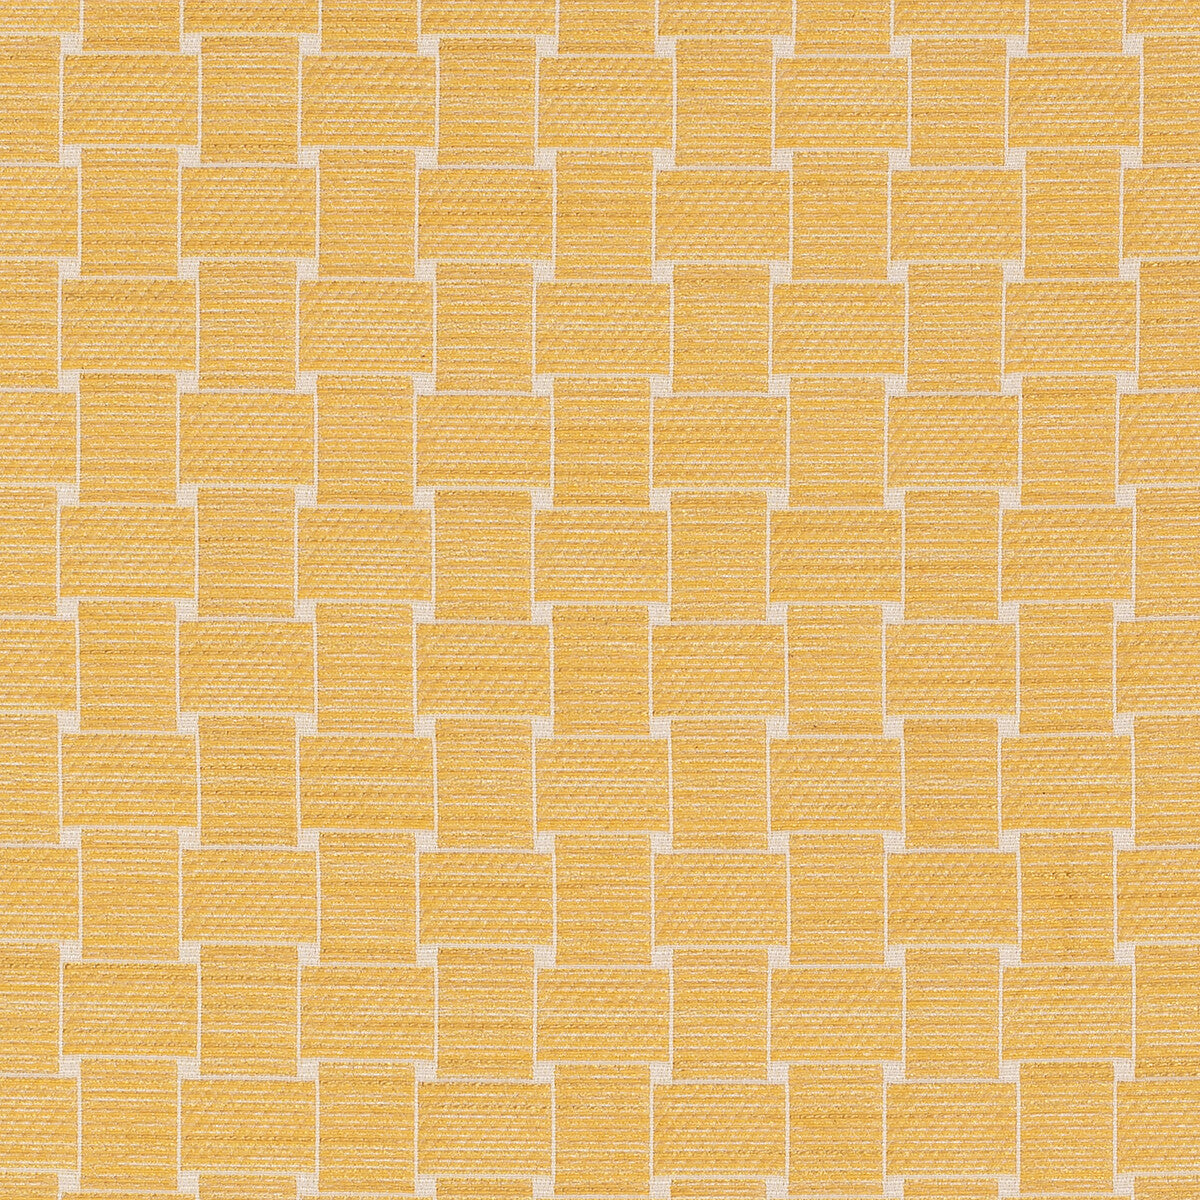 Beaumois Woven fabric in canary color - pattern 8020108.4.0 - by Brunschwig &amp; Fils in the Granville Weaves collection